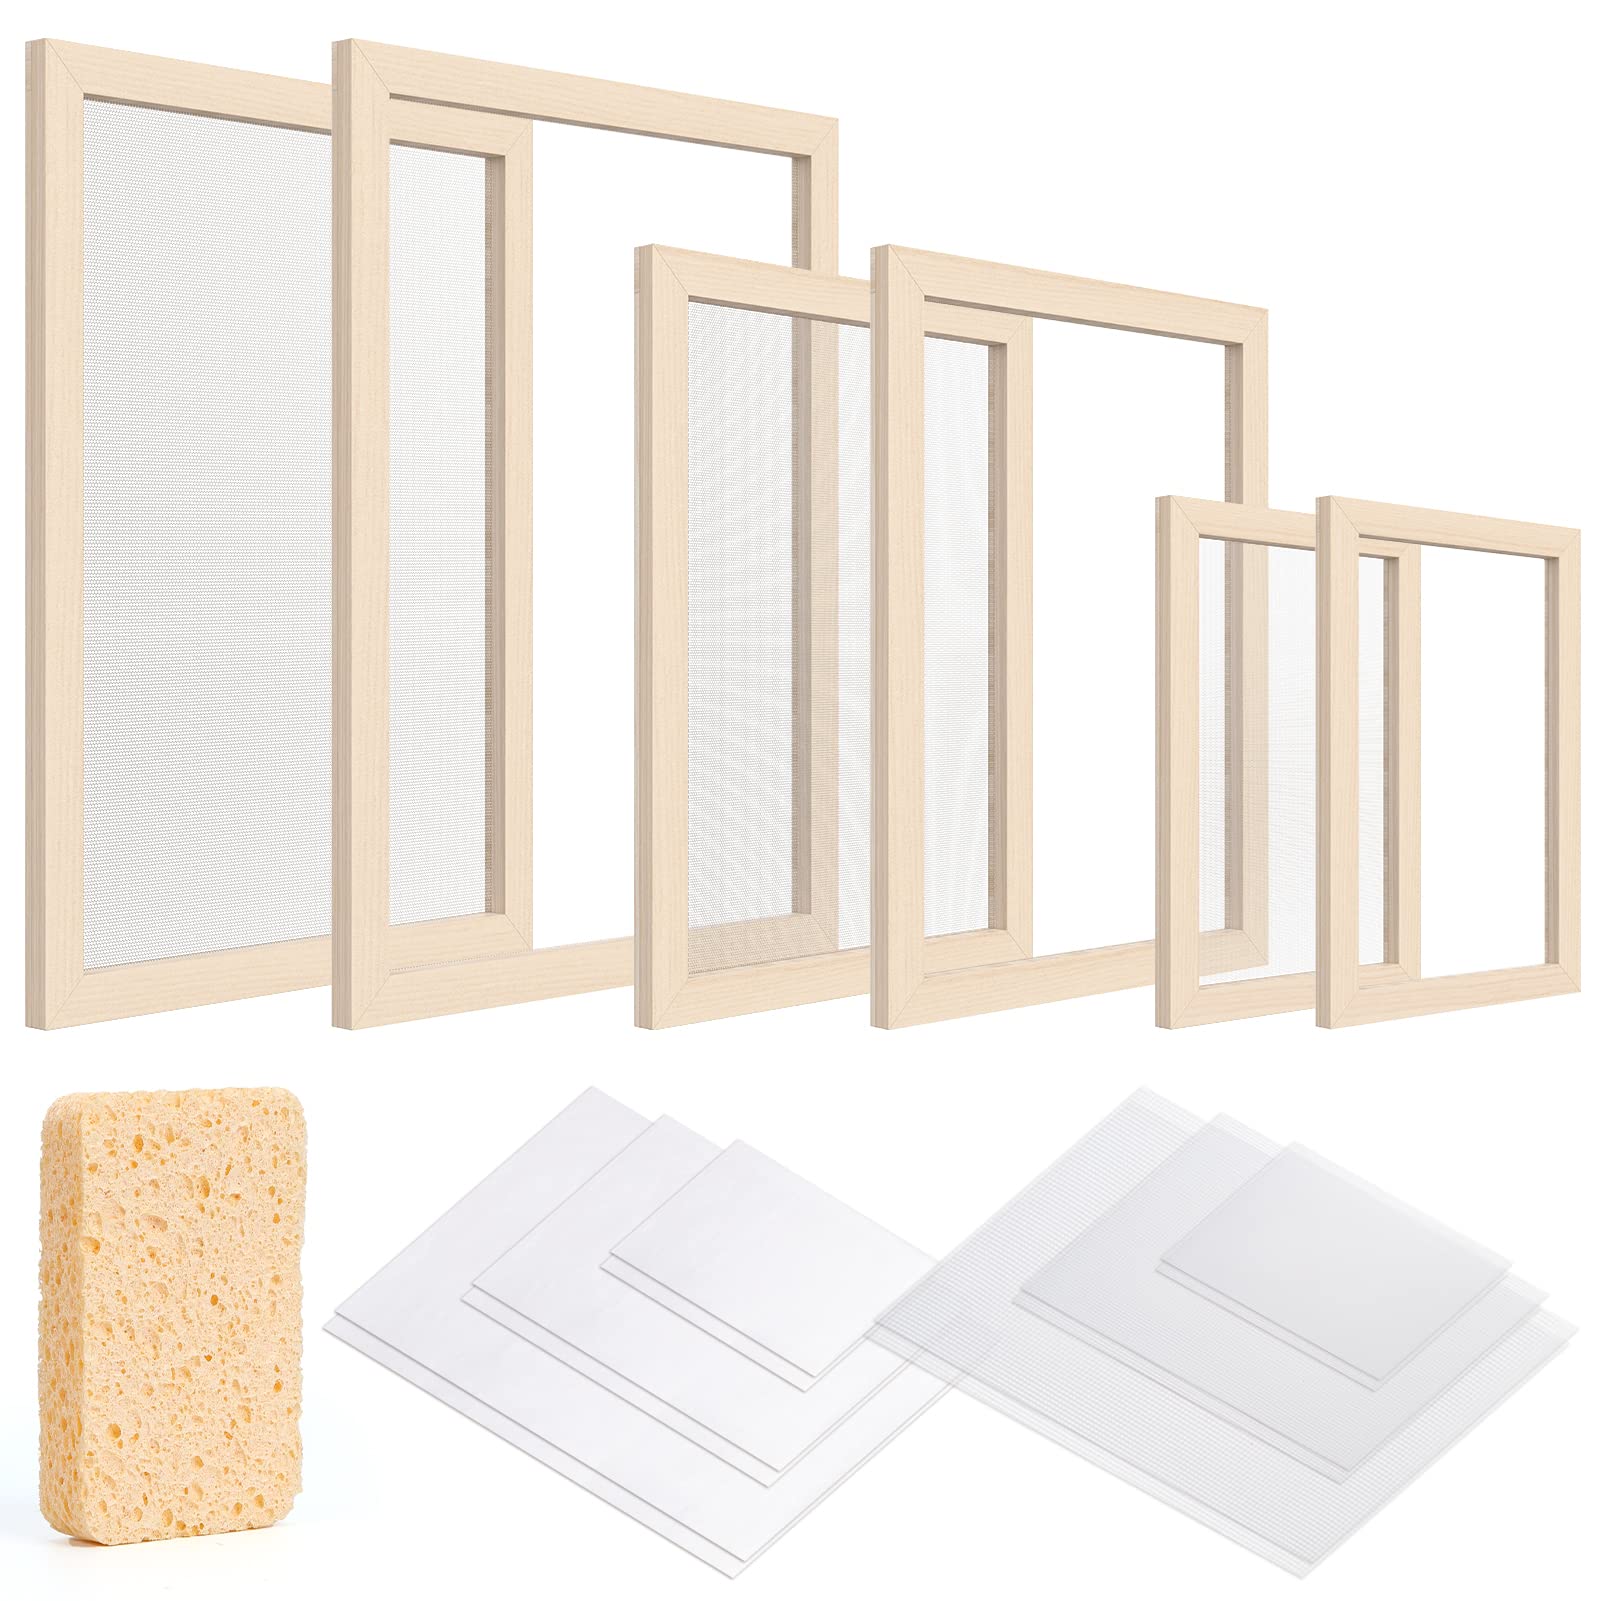 Caydo Paper Making Kit, Include A5 Size 7.5 x 9.8 Inch Wooden Paper Making  Mould Frame Paper Making Screen, Nature Dried Flowers and Sponge for DIY